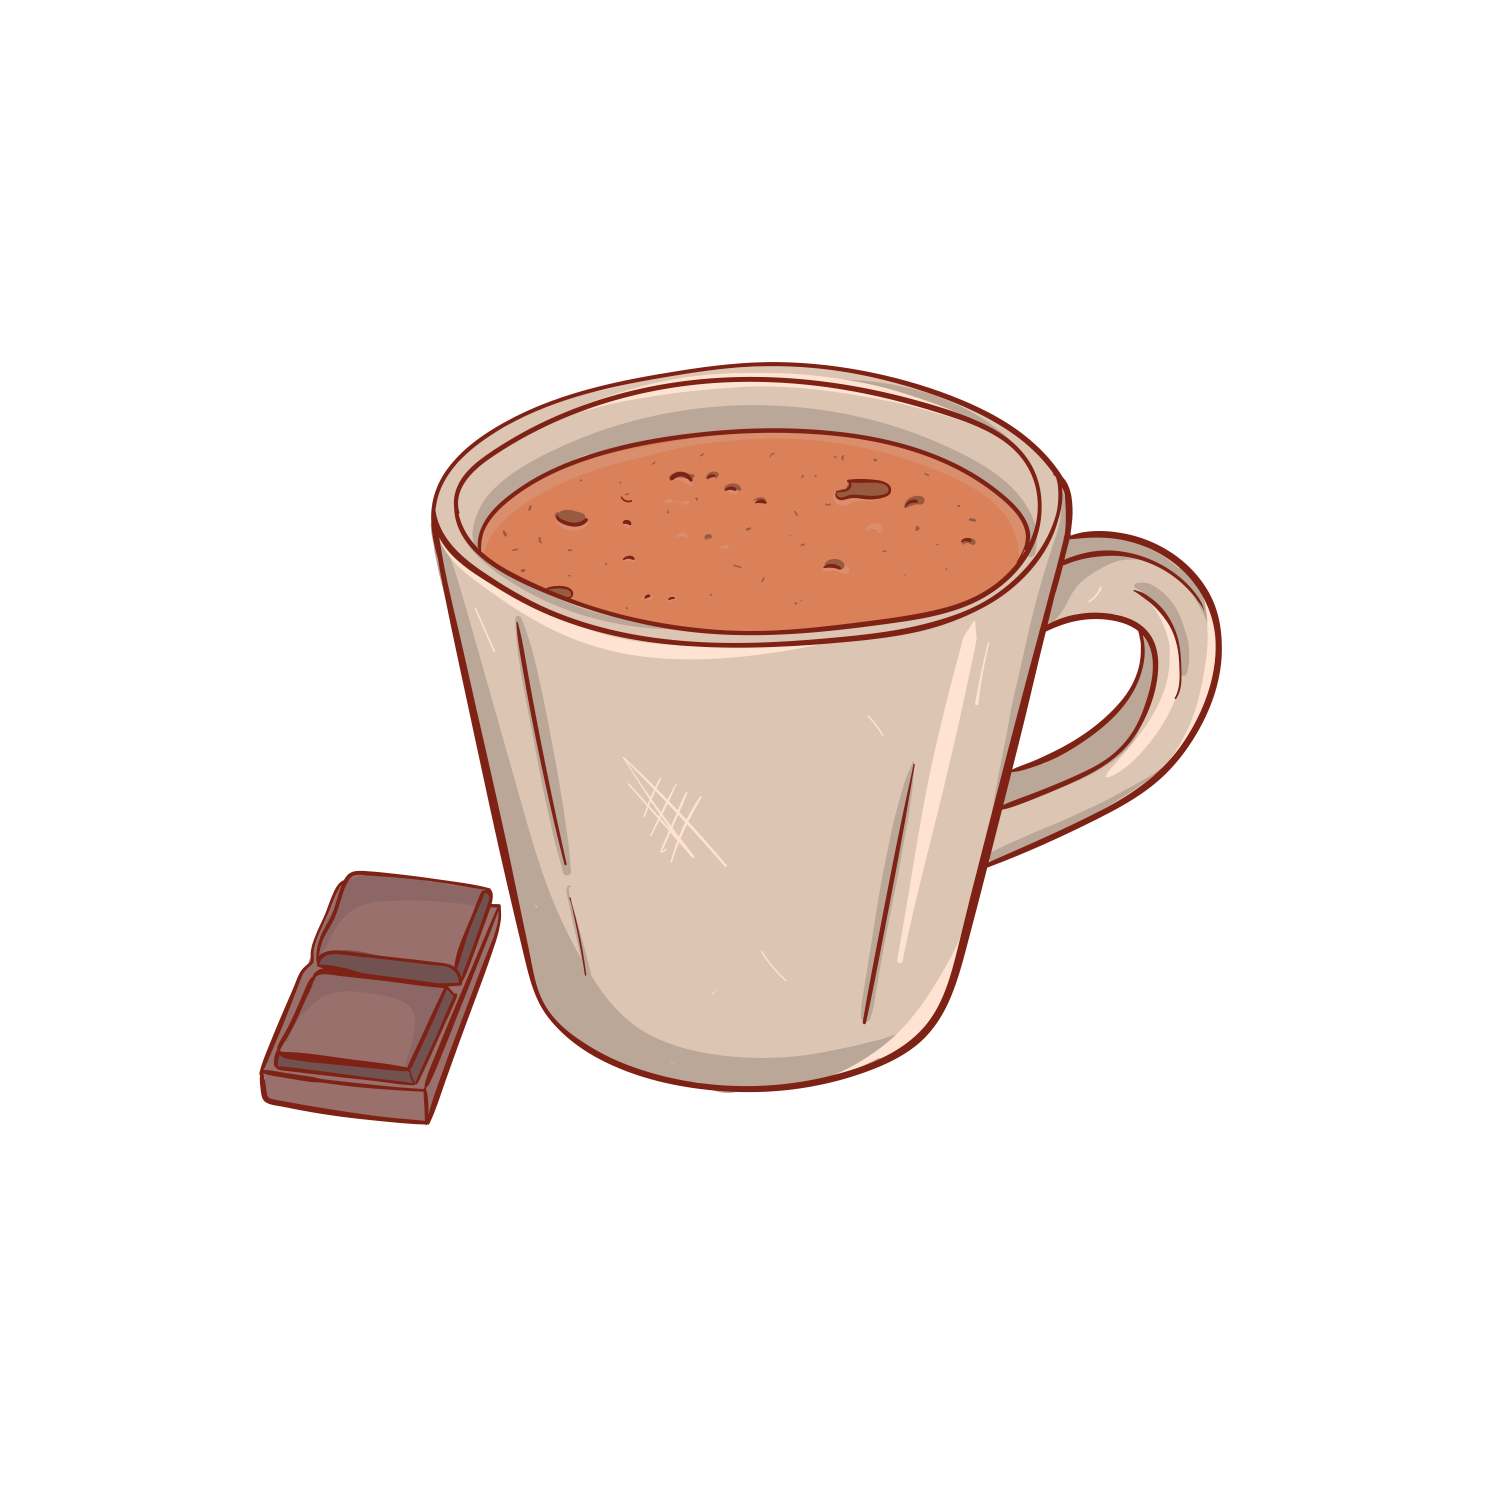 https://curryhouse-chambery.fr/wp-content/uploads/2019/12/chocolat_chaud.png